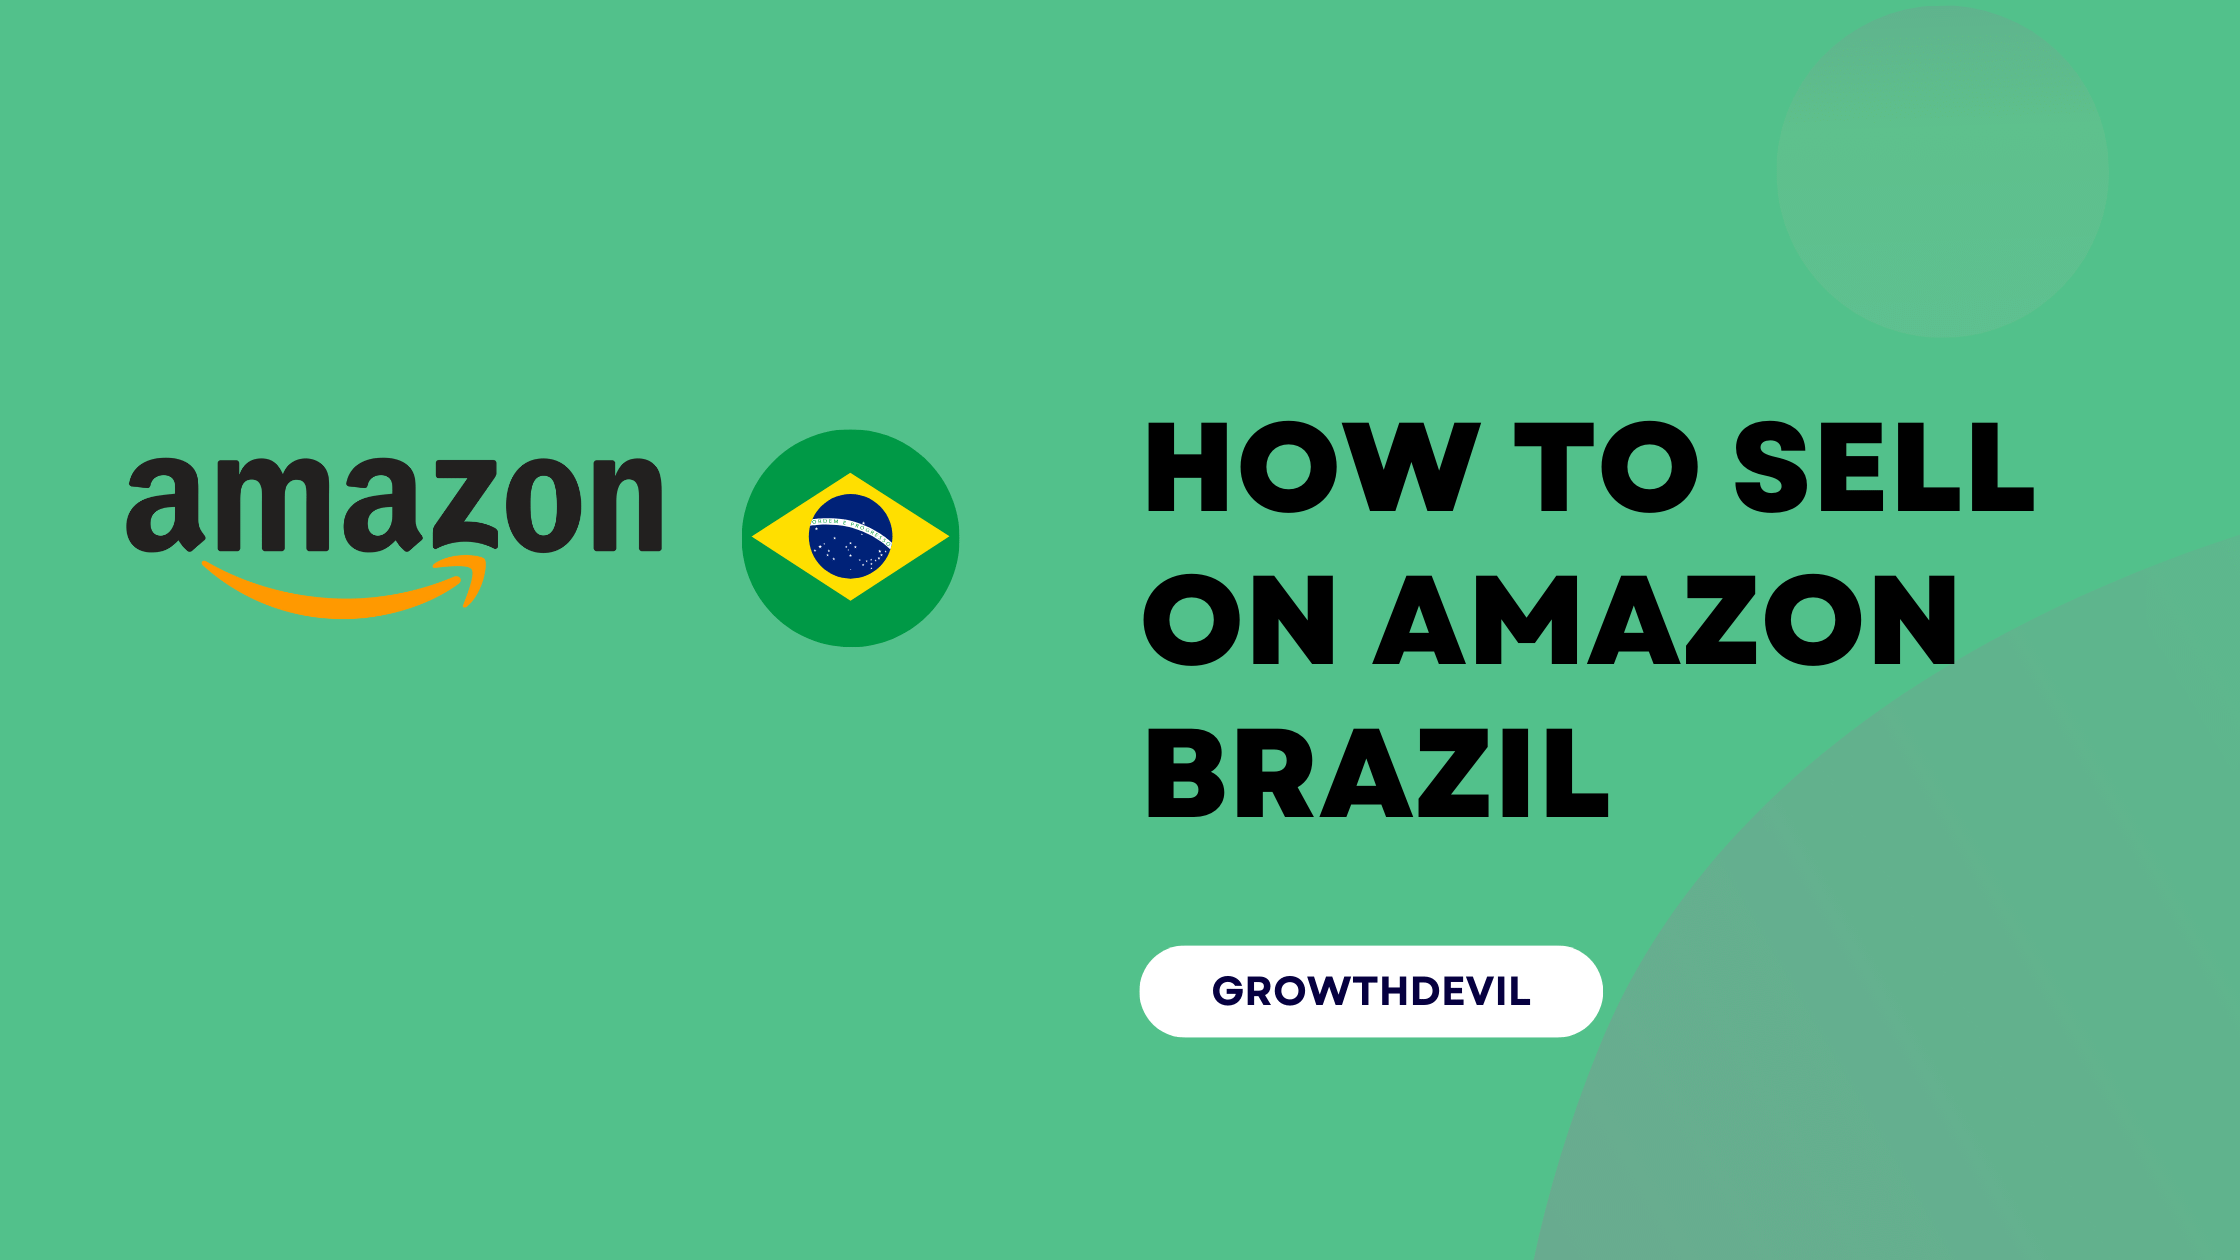 How To Sell On Amazon Brazil - GrowthDevil